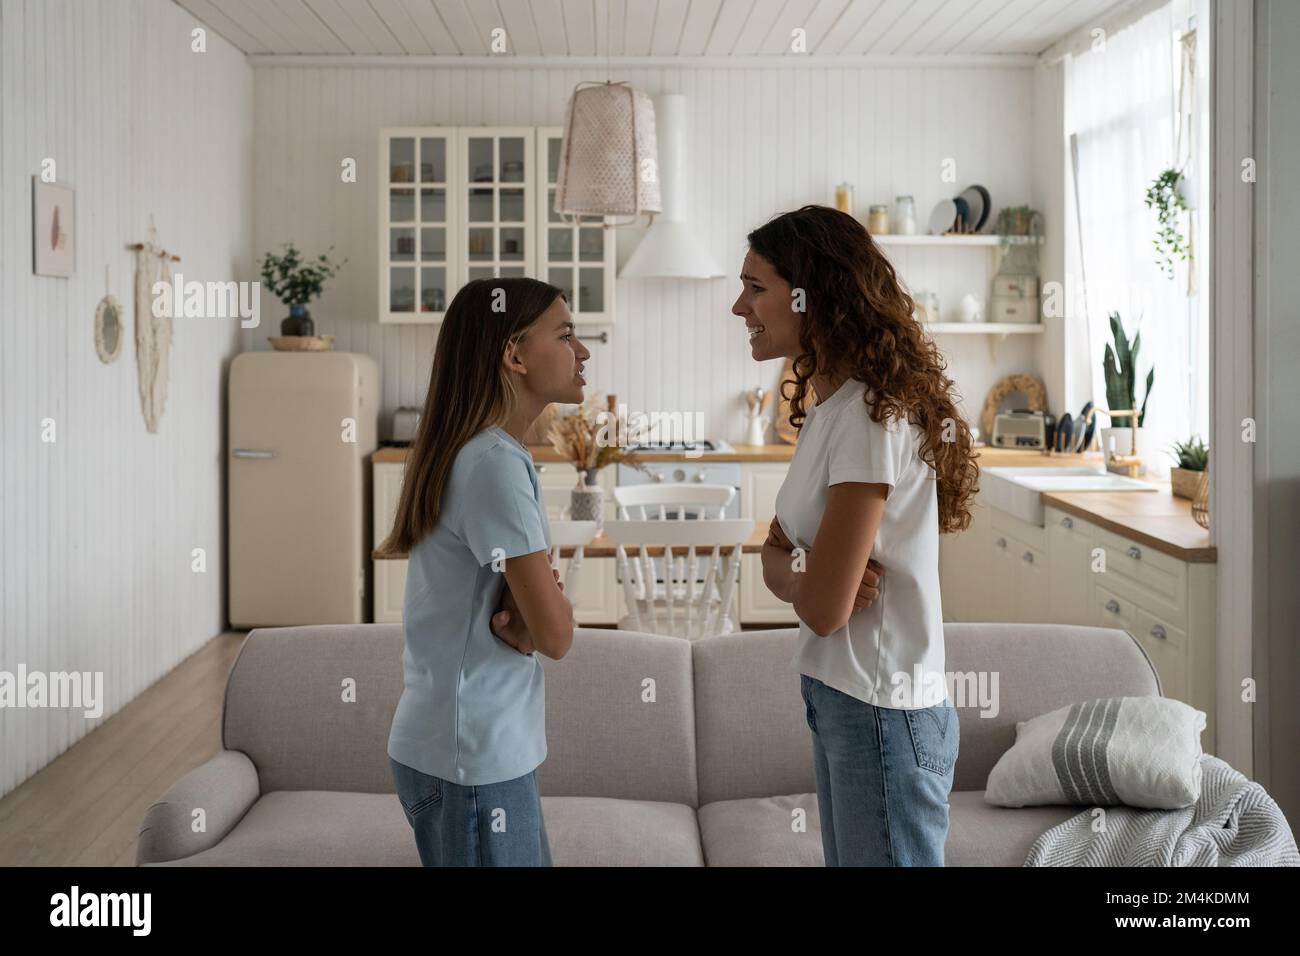 Troubled teen girl daughter and mother quarreling arguing at home, yelling at each other Stock Photo